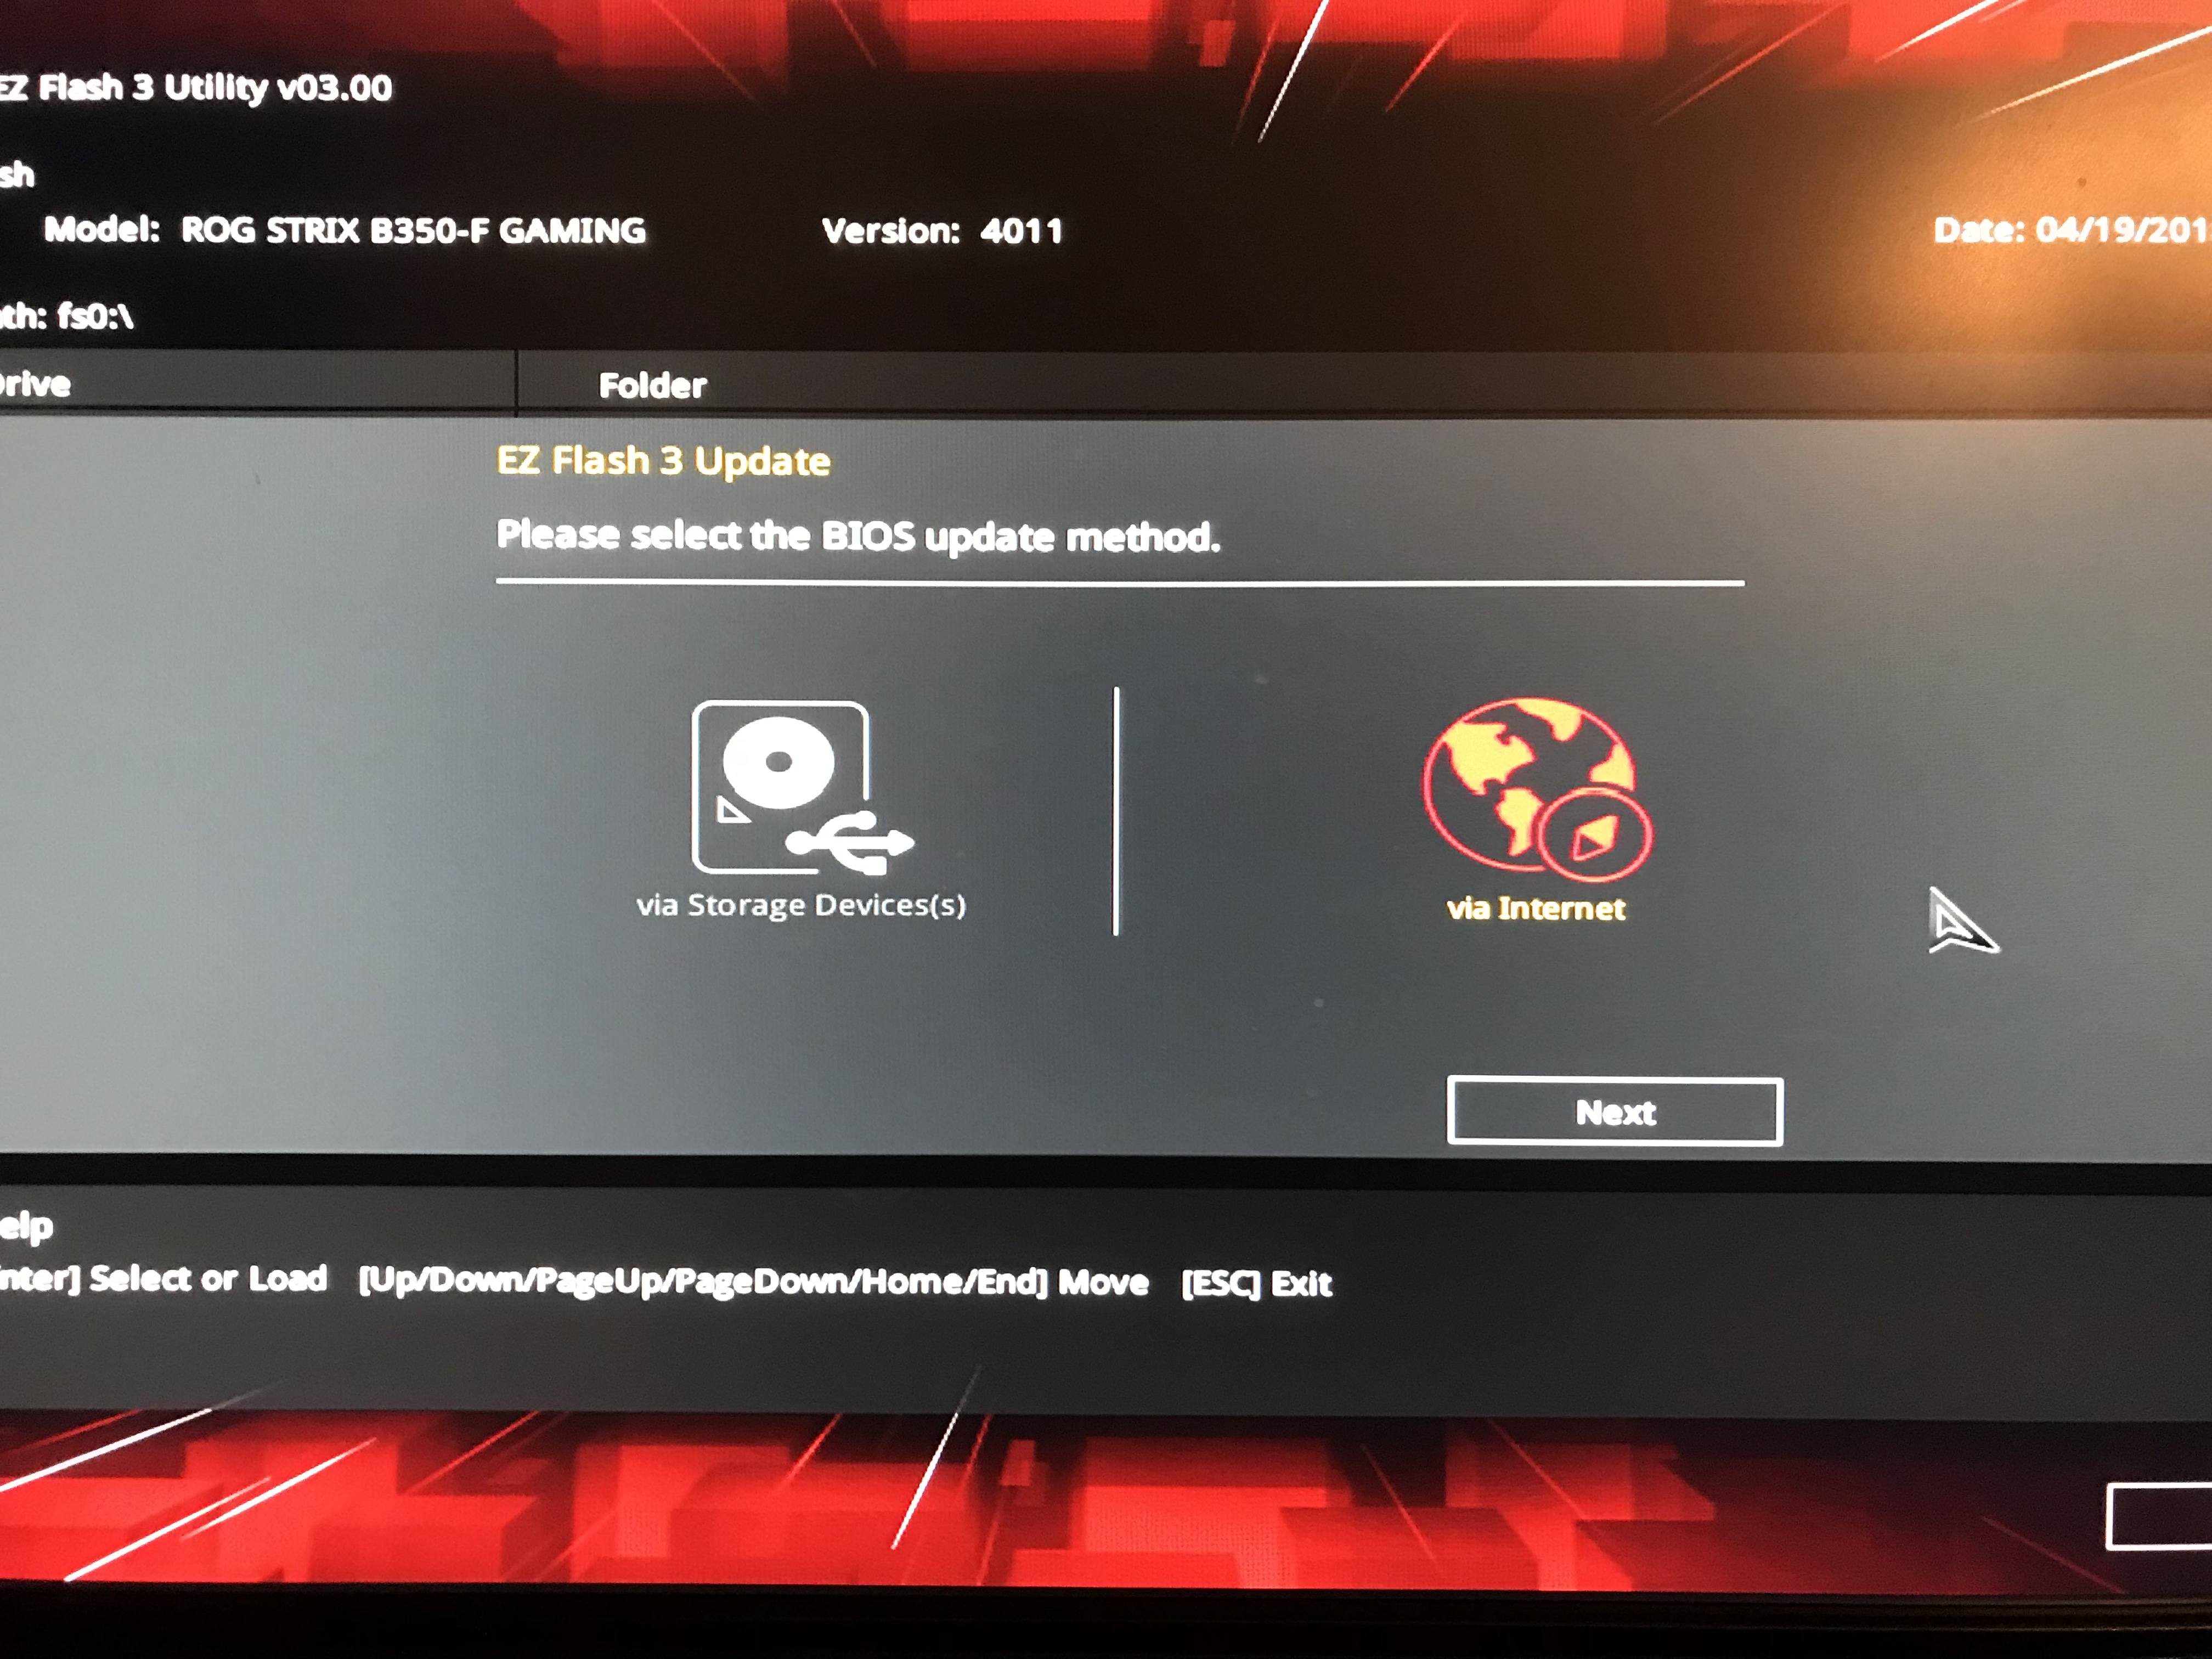 Begrænse Potentiel grundigt Asus EZ Flash 3 Utility Bios Update Problems with ROG STRIX B350-F Gaming -  CPUs, Motherboards, and Memory - Linus Tech Tips